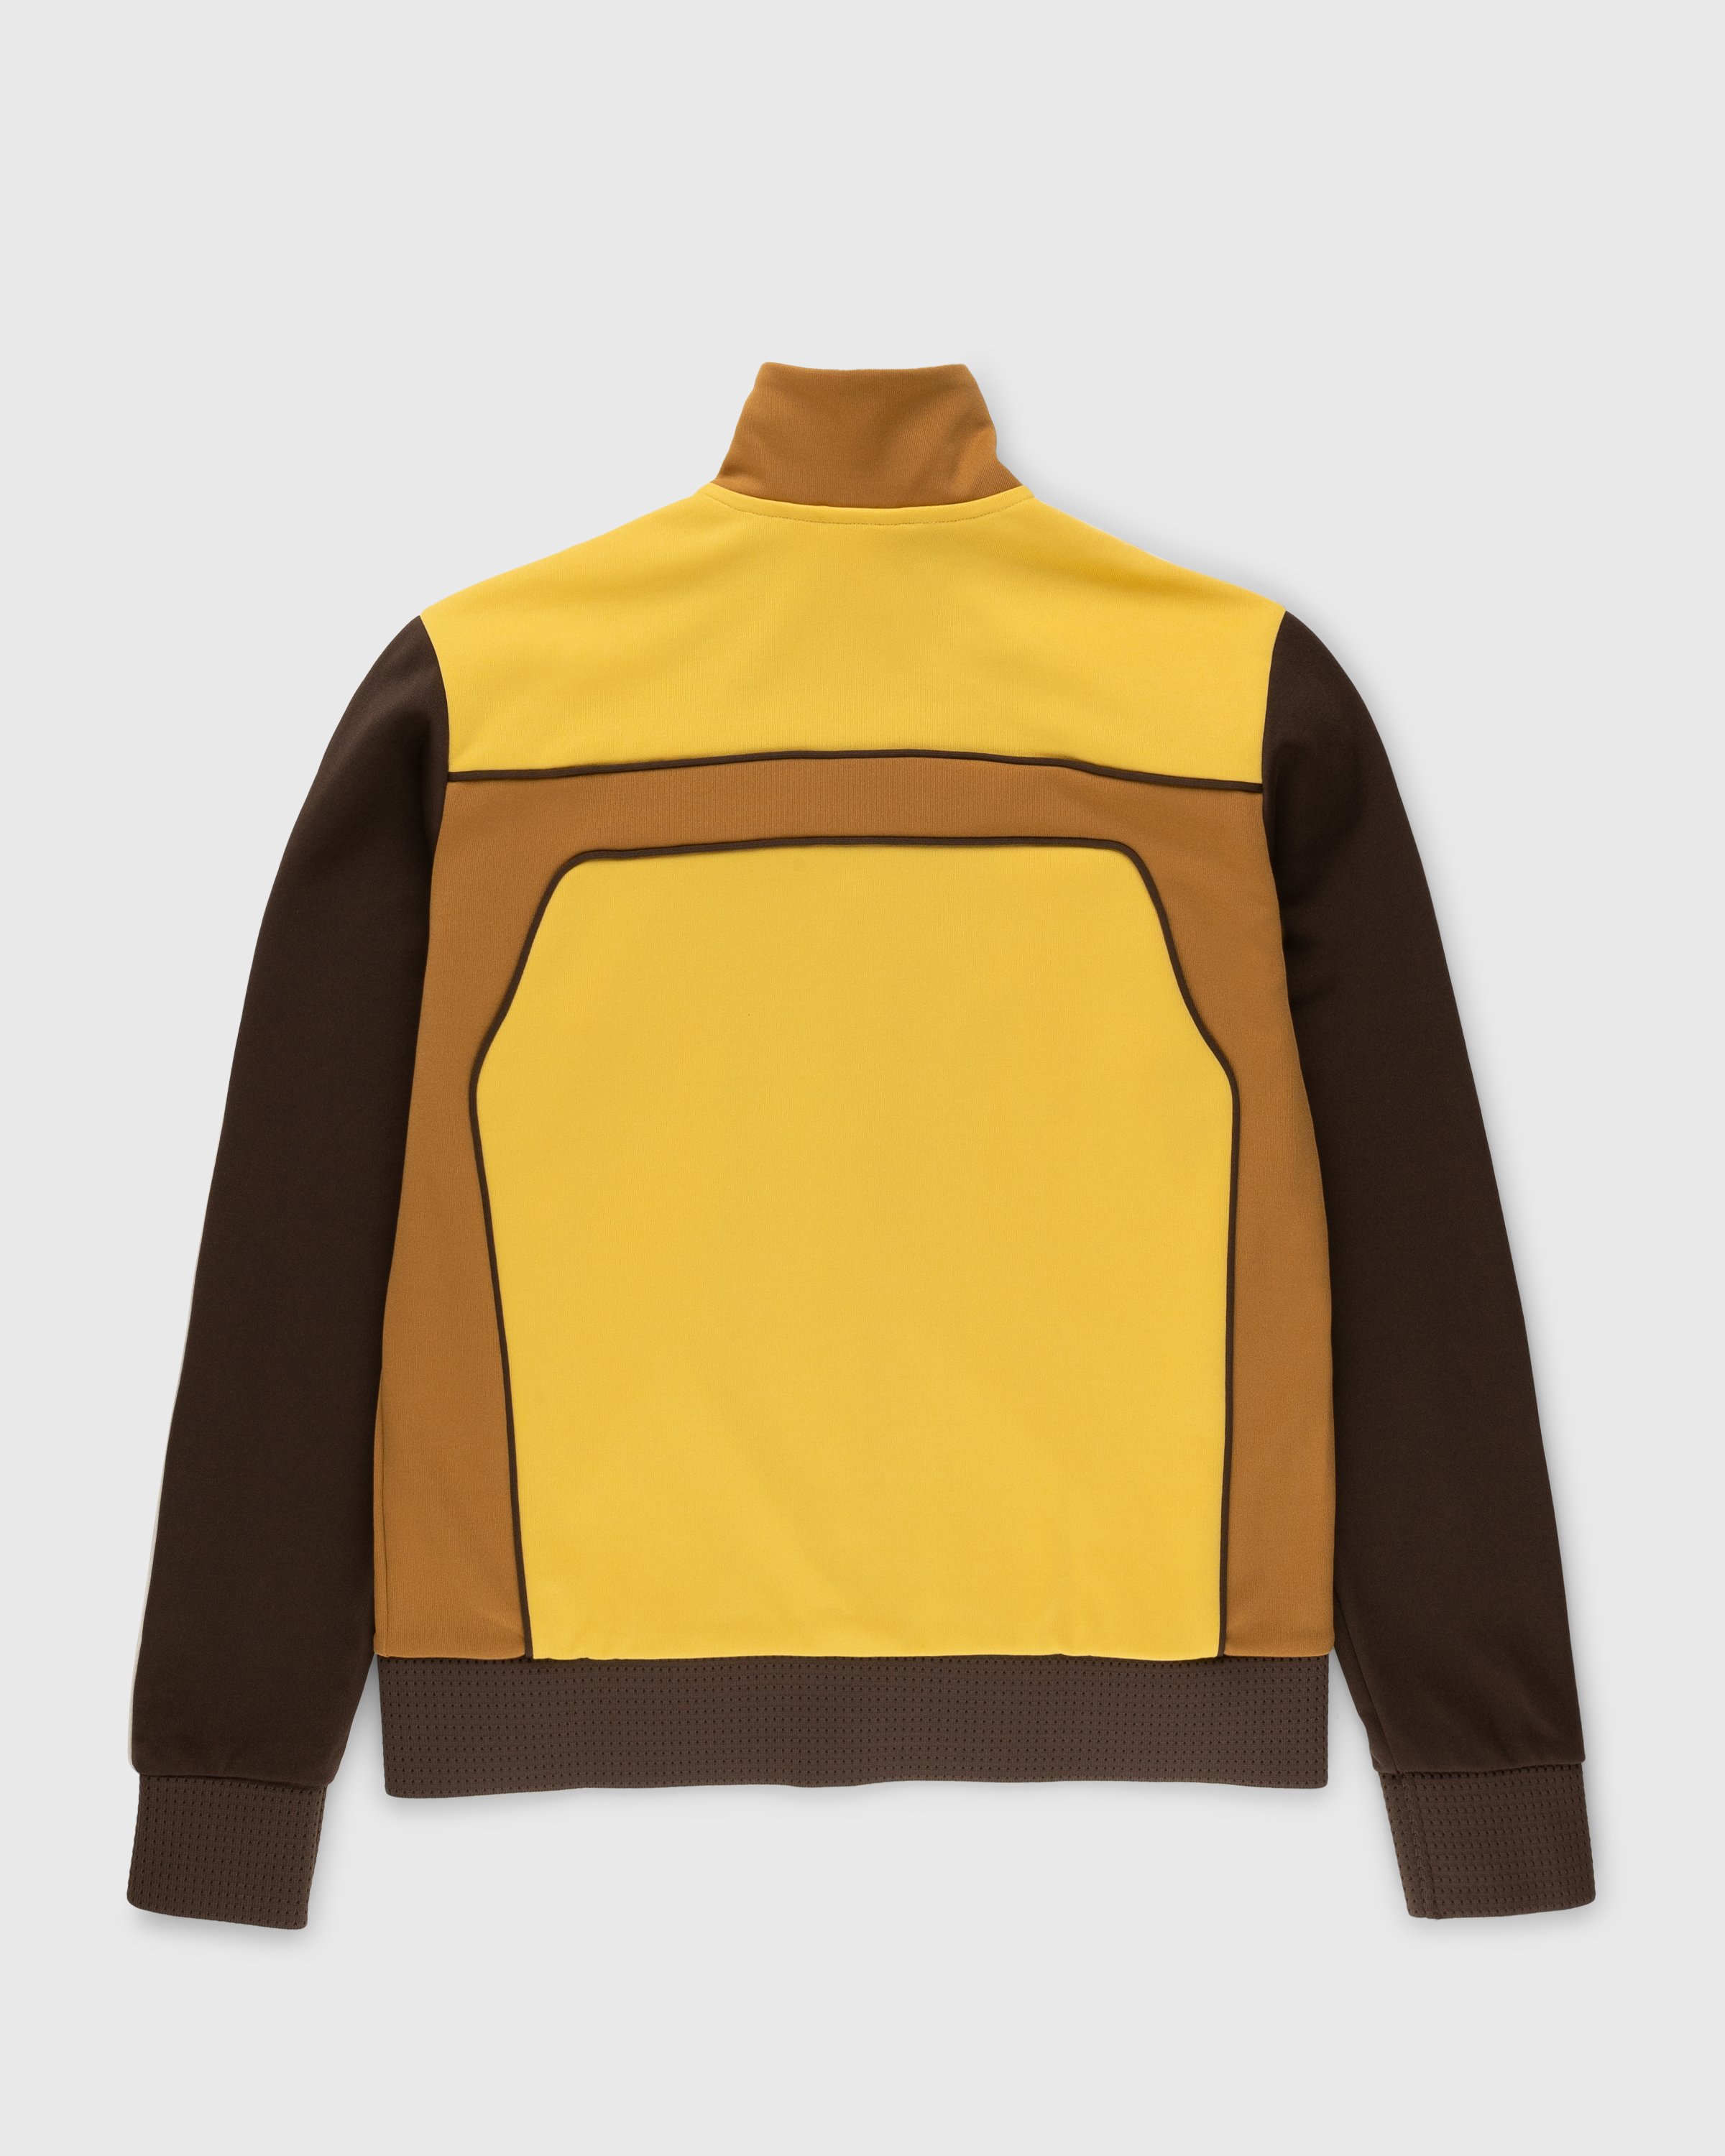 Adidas x Wales Bonner - WB Track Top St Fade Gold - Clothing - Yellow - Image 2